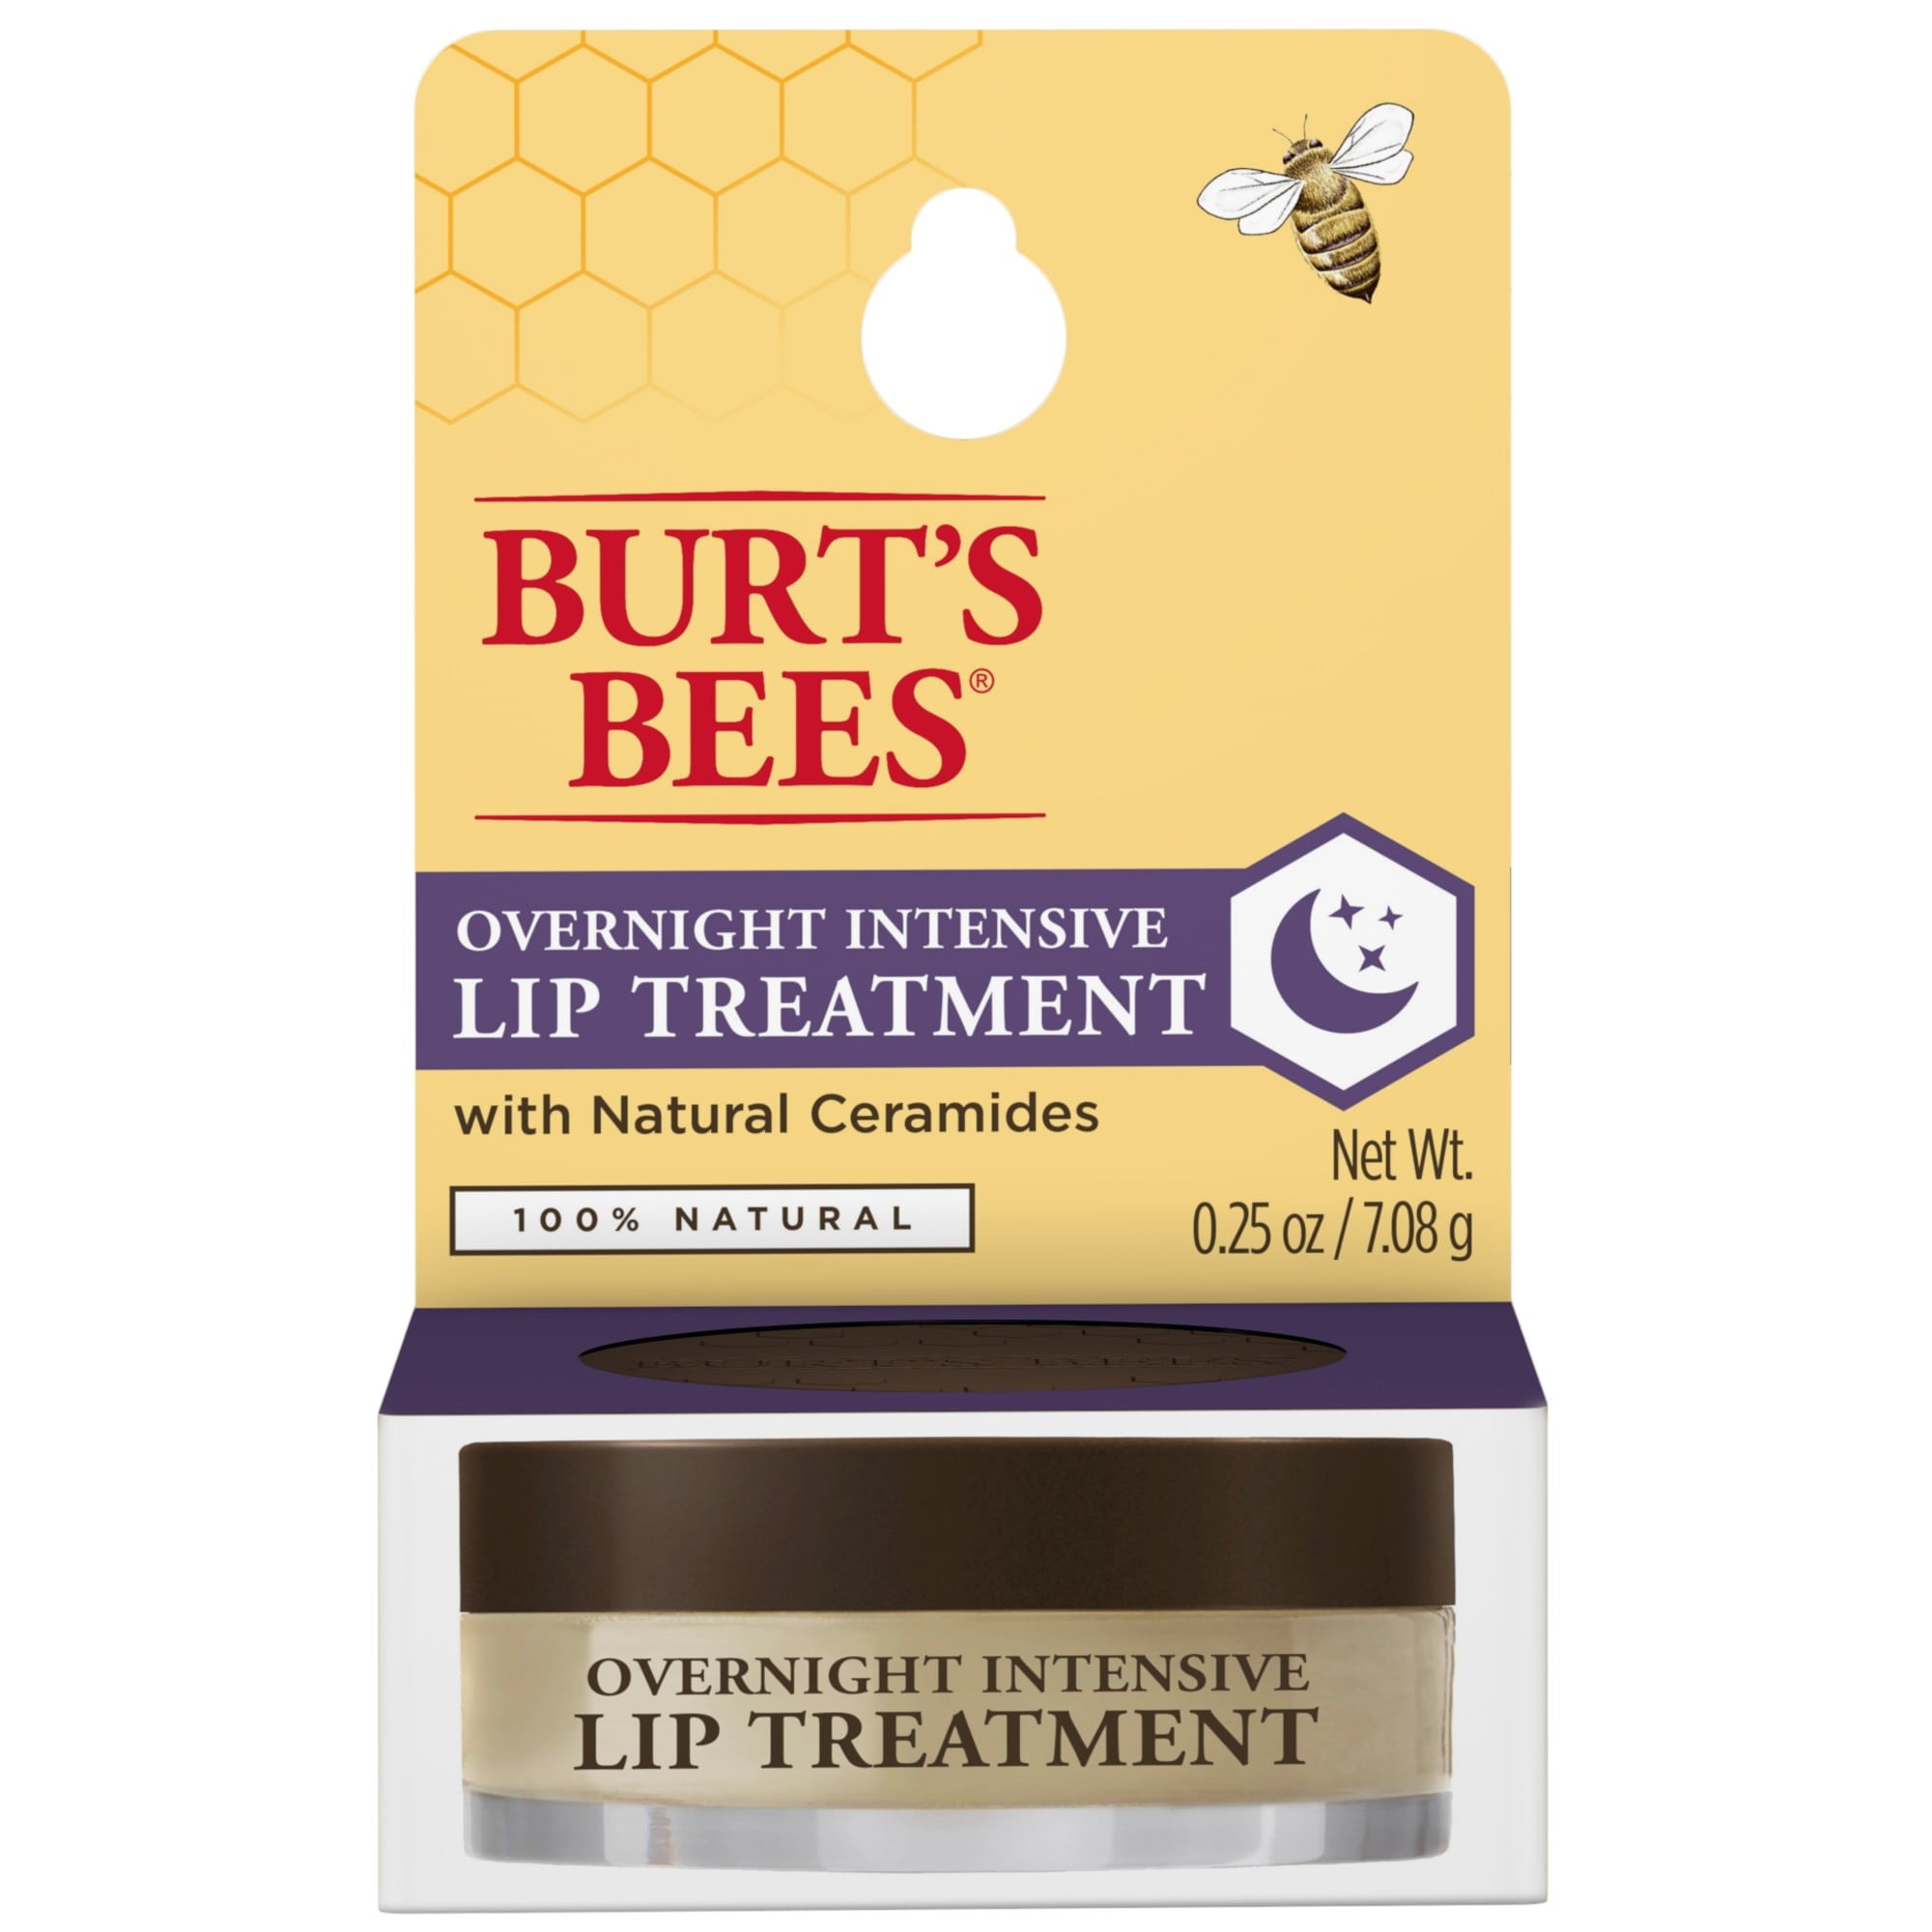 Burt's Bees Lip Balms and Overnight Lip Treatment Review: For Naturally  Pampered Lips 24/7?